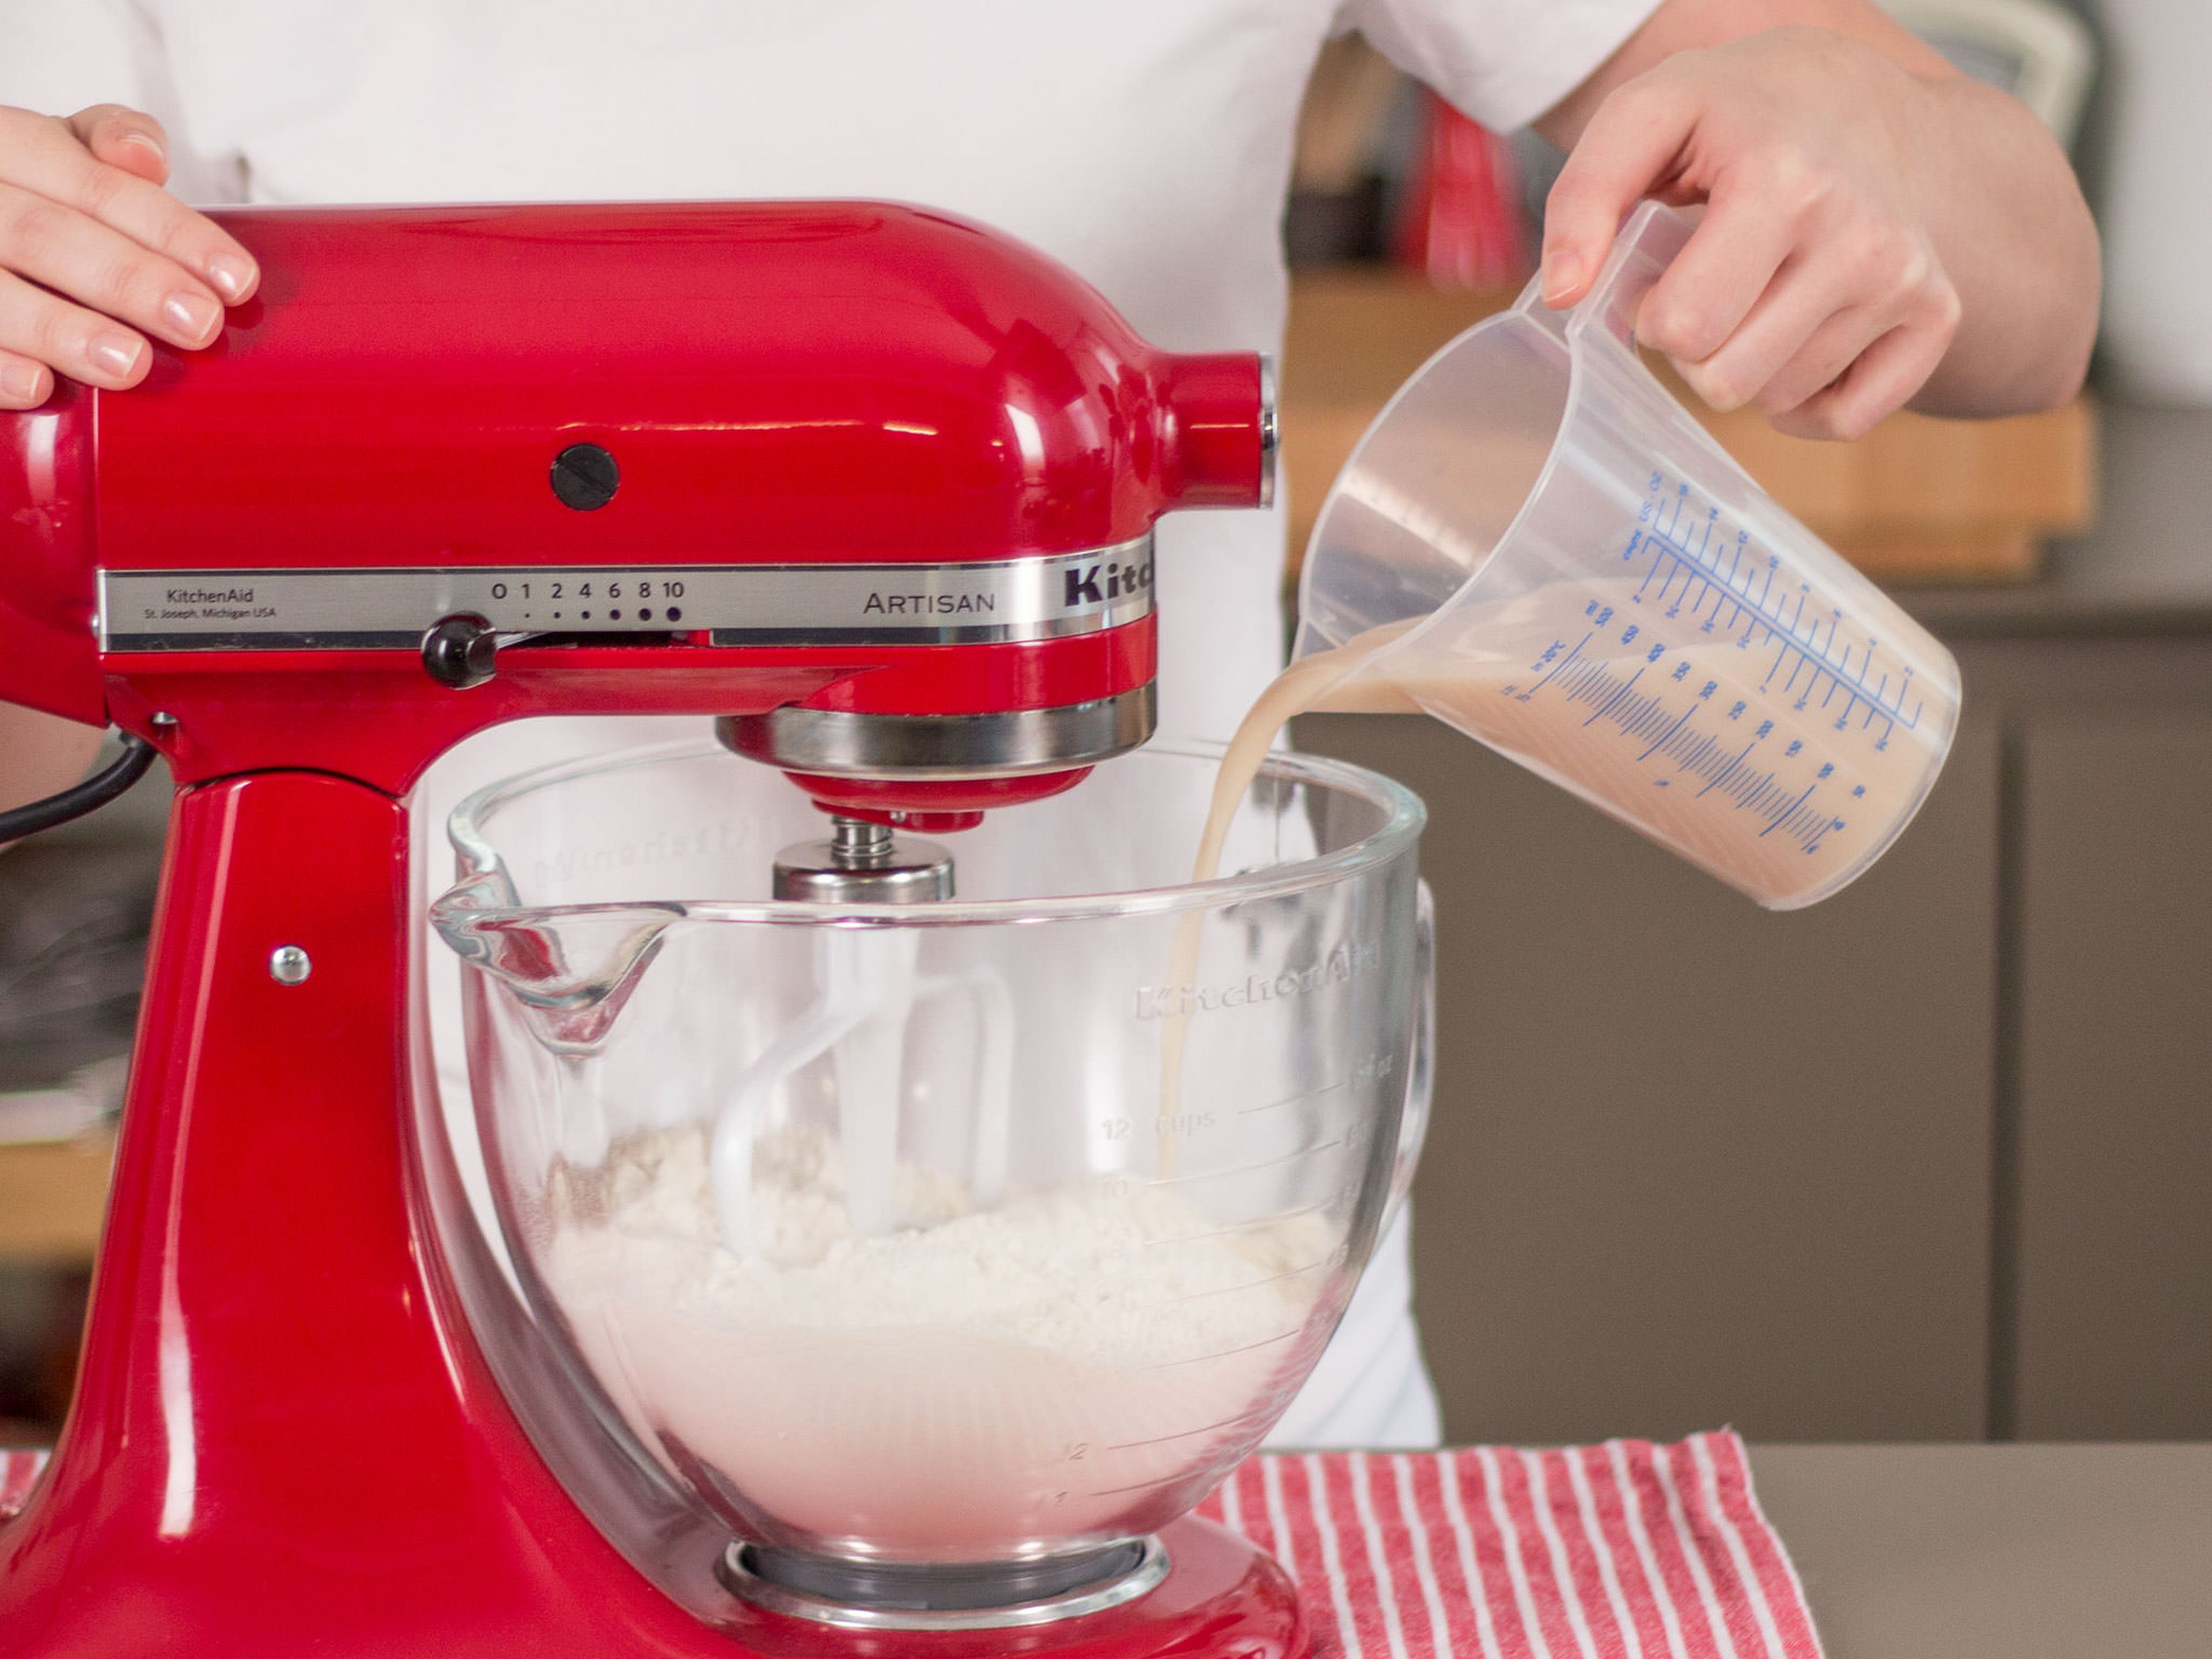 Dissolve yeast and part of sugar in lukewarm water and then add mixture to a standing mixer with flour. Beat until a smooth, even dough forms. Cover and let rise in a warm place for approx. 15 – 20 min. until dough has doubled in volume.